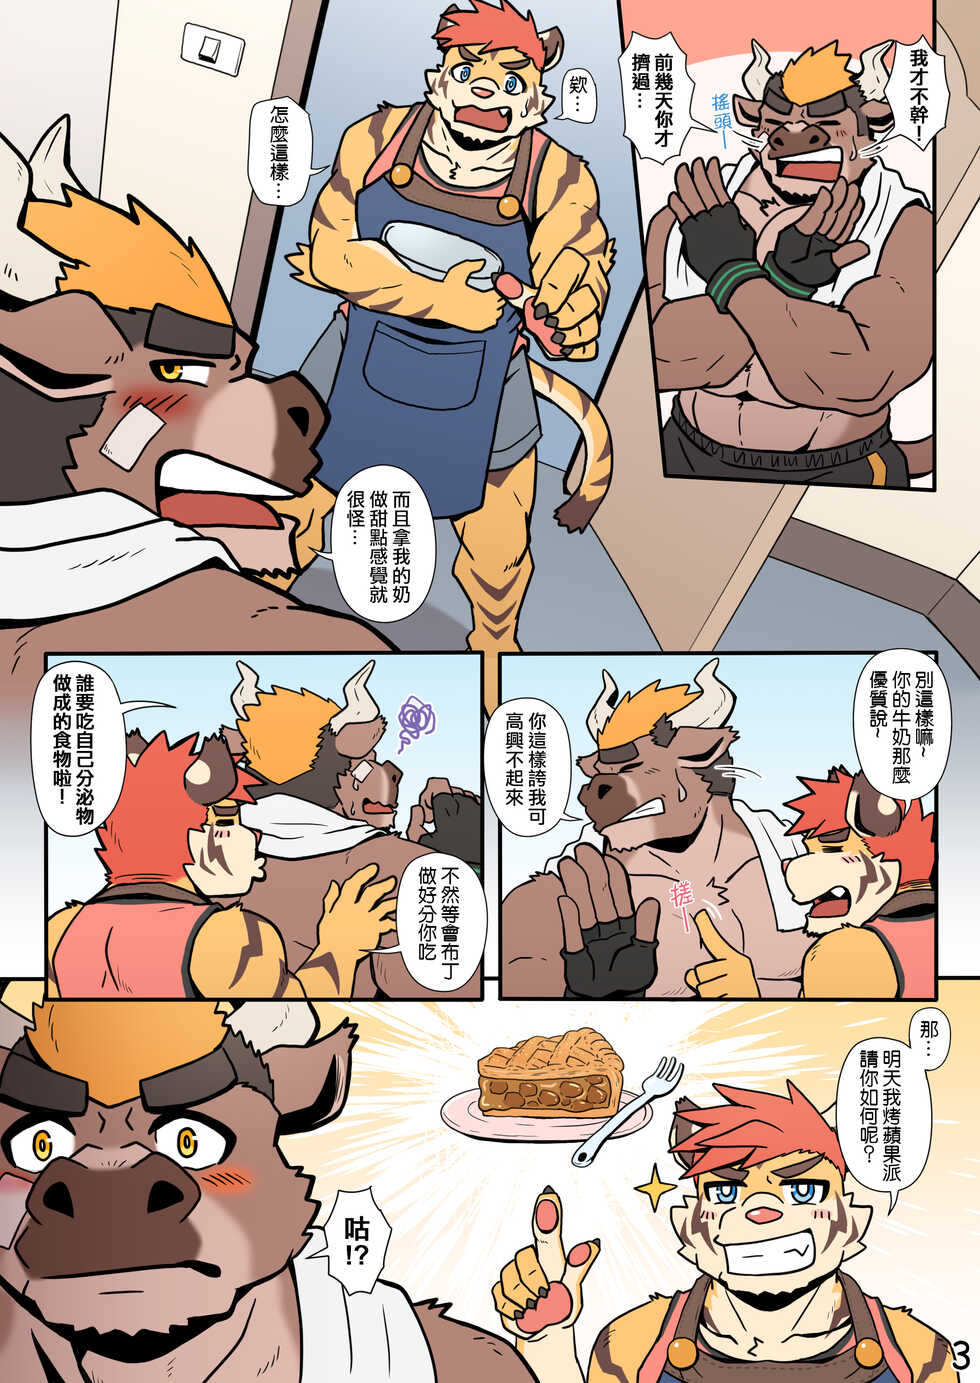 [Ripple Moon] My Milky Roomie: Homemade Pudding [Flat Colors] [Chinese] - Page 4